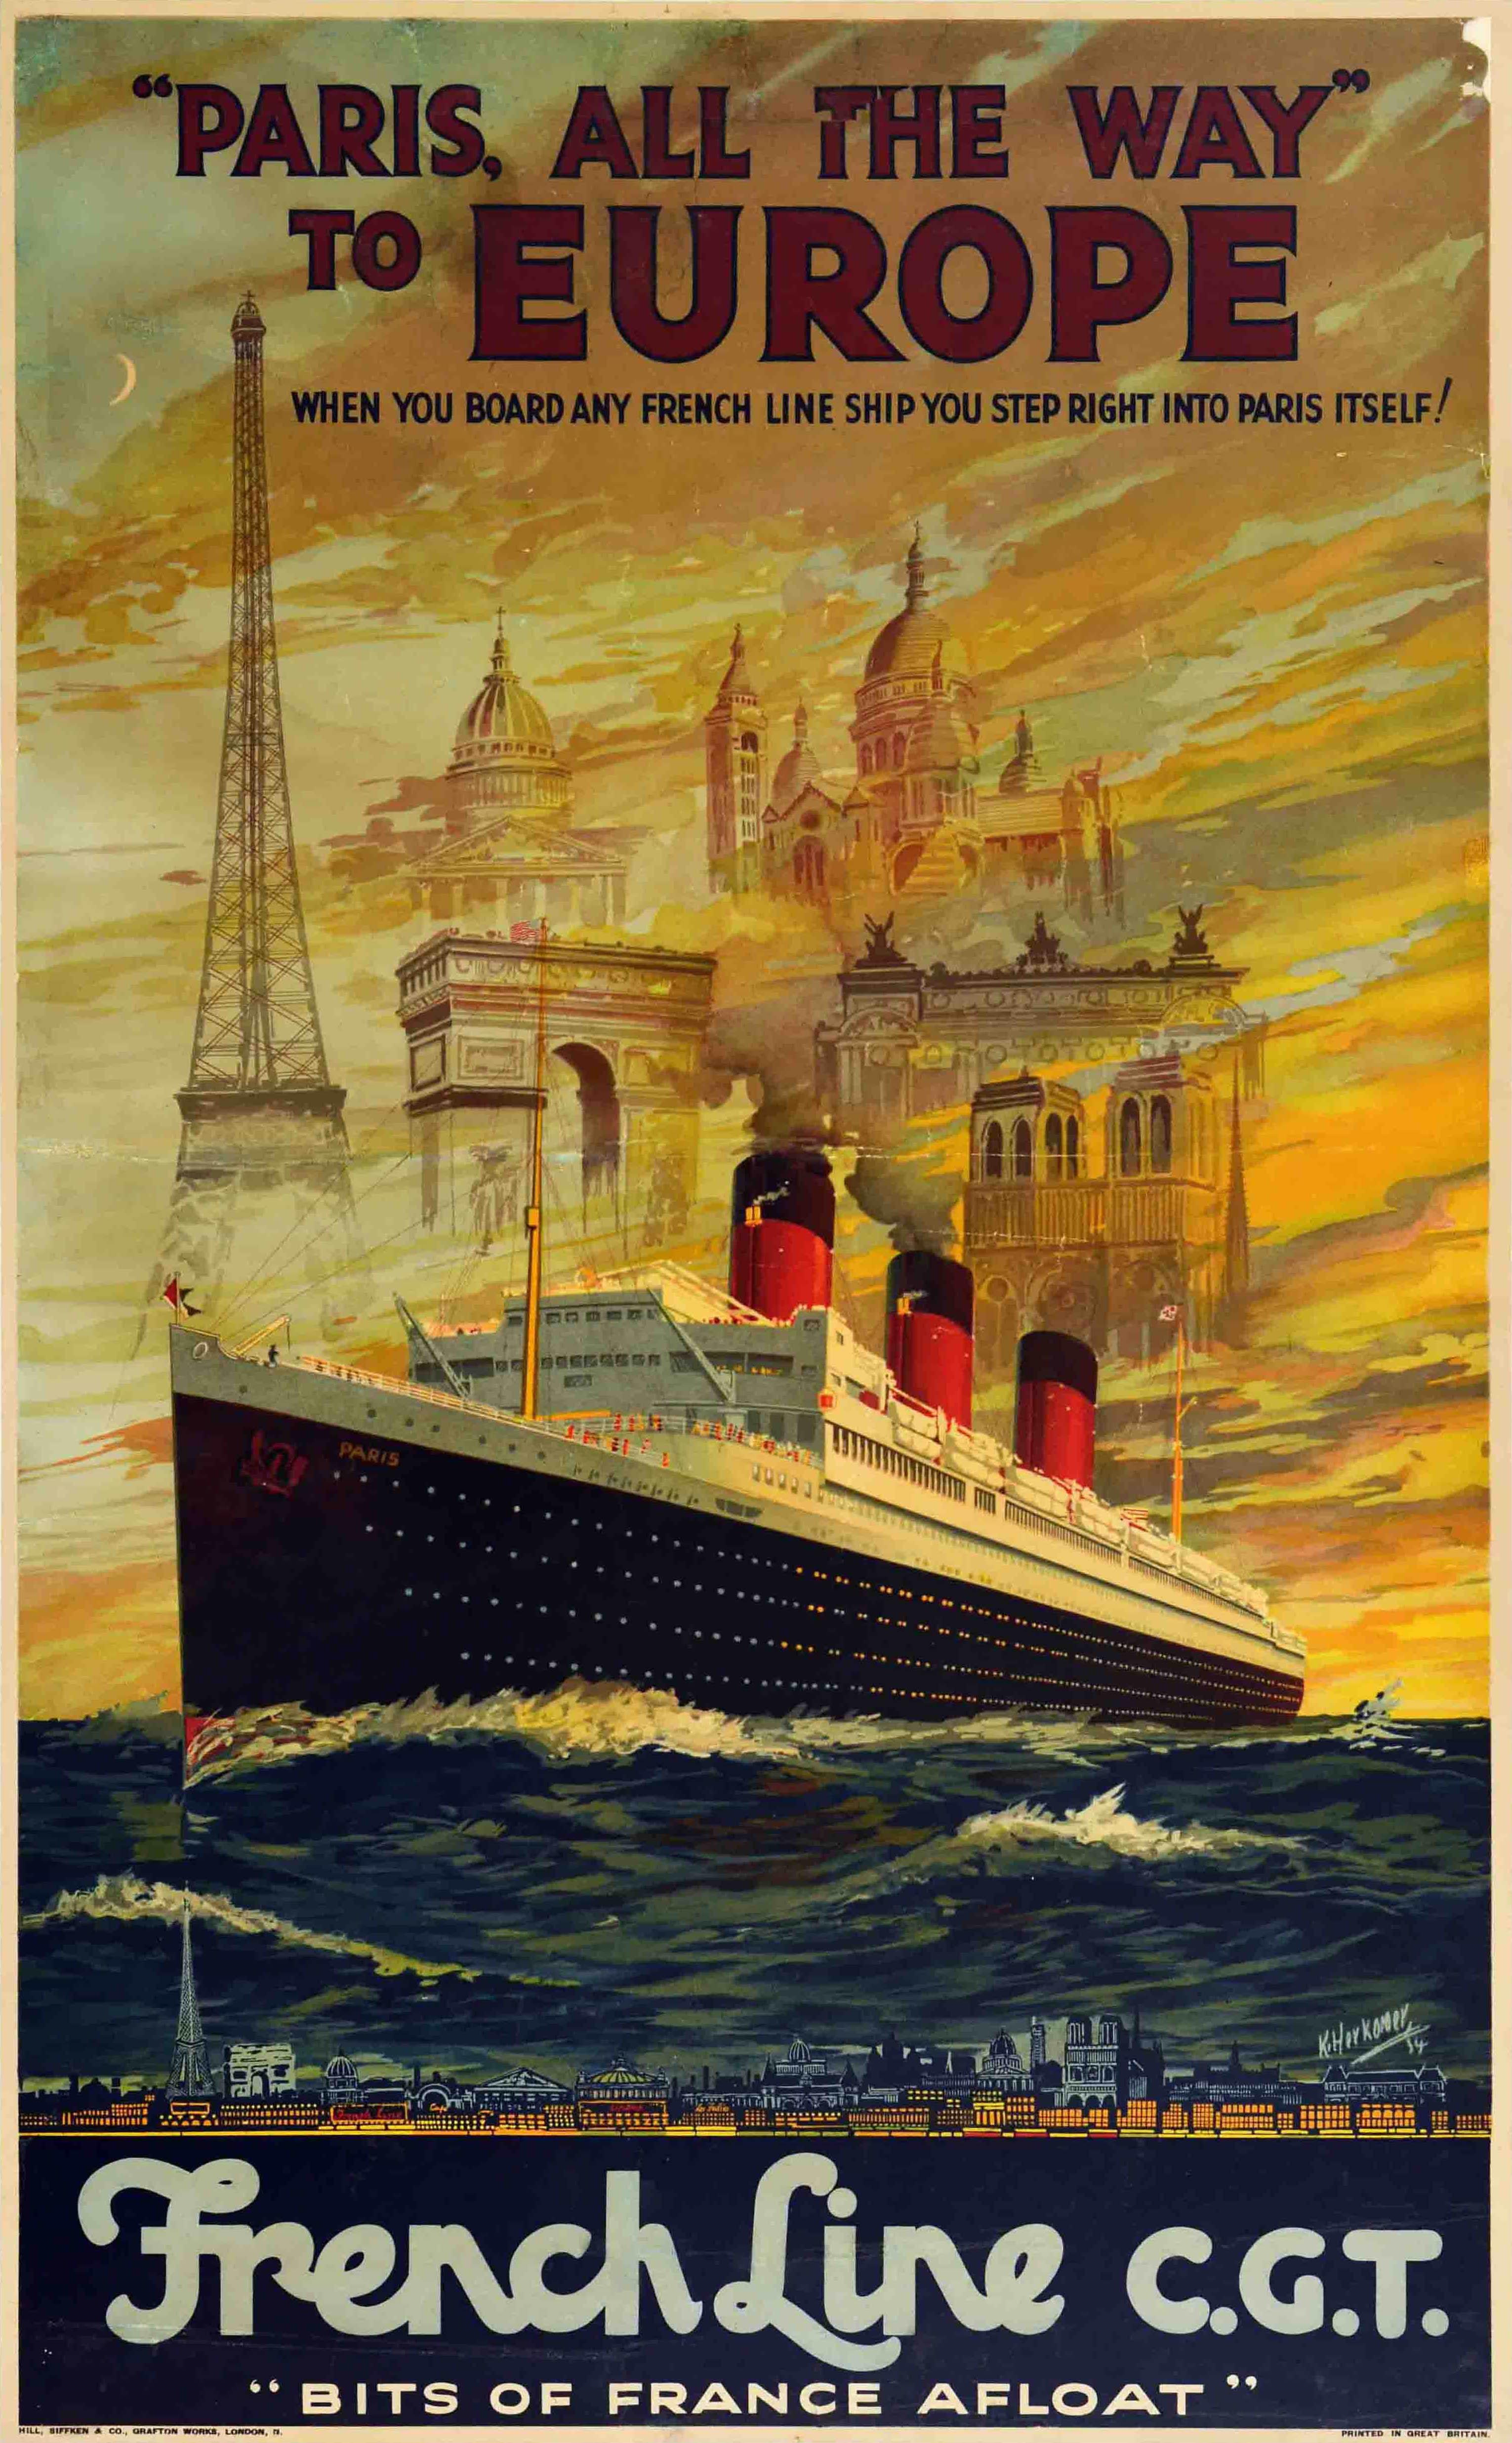 Unknown Print - Original Vintage Cruise Travel Poster Paris All The Way To Europe French Line